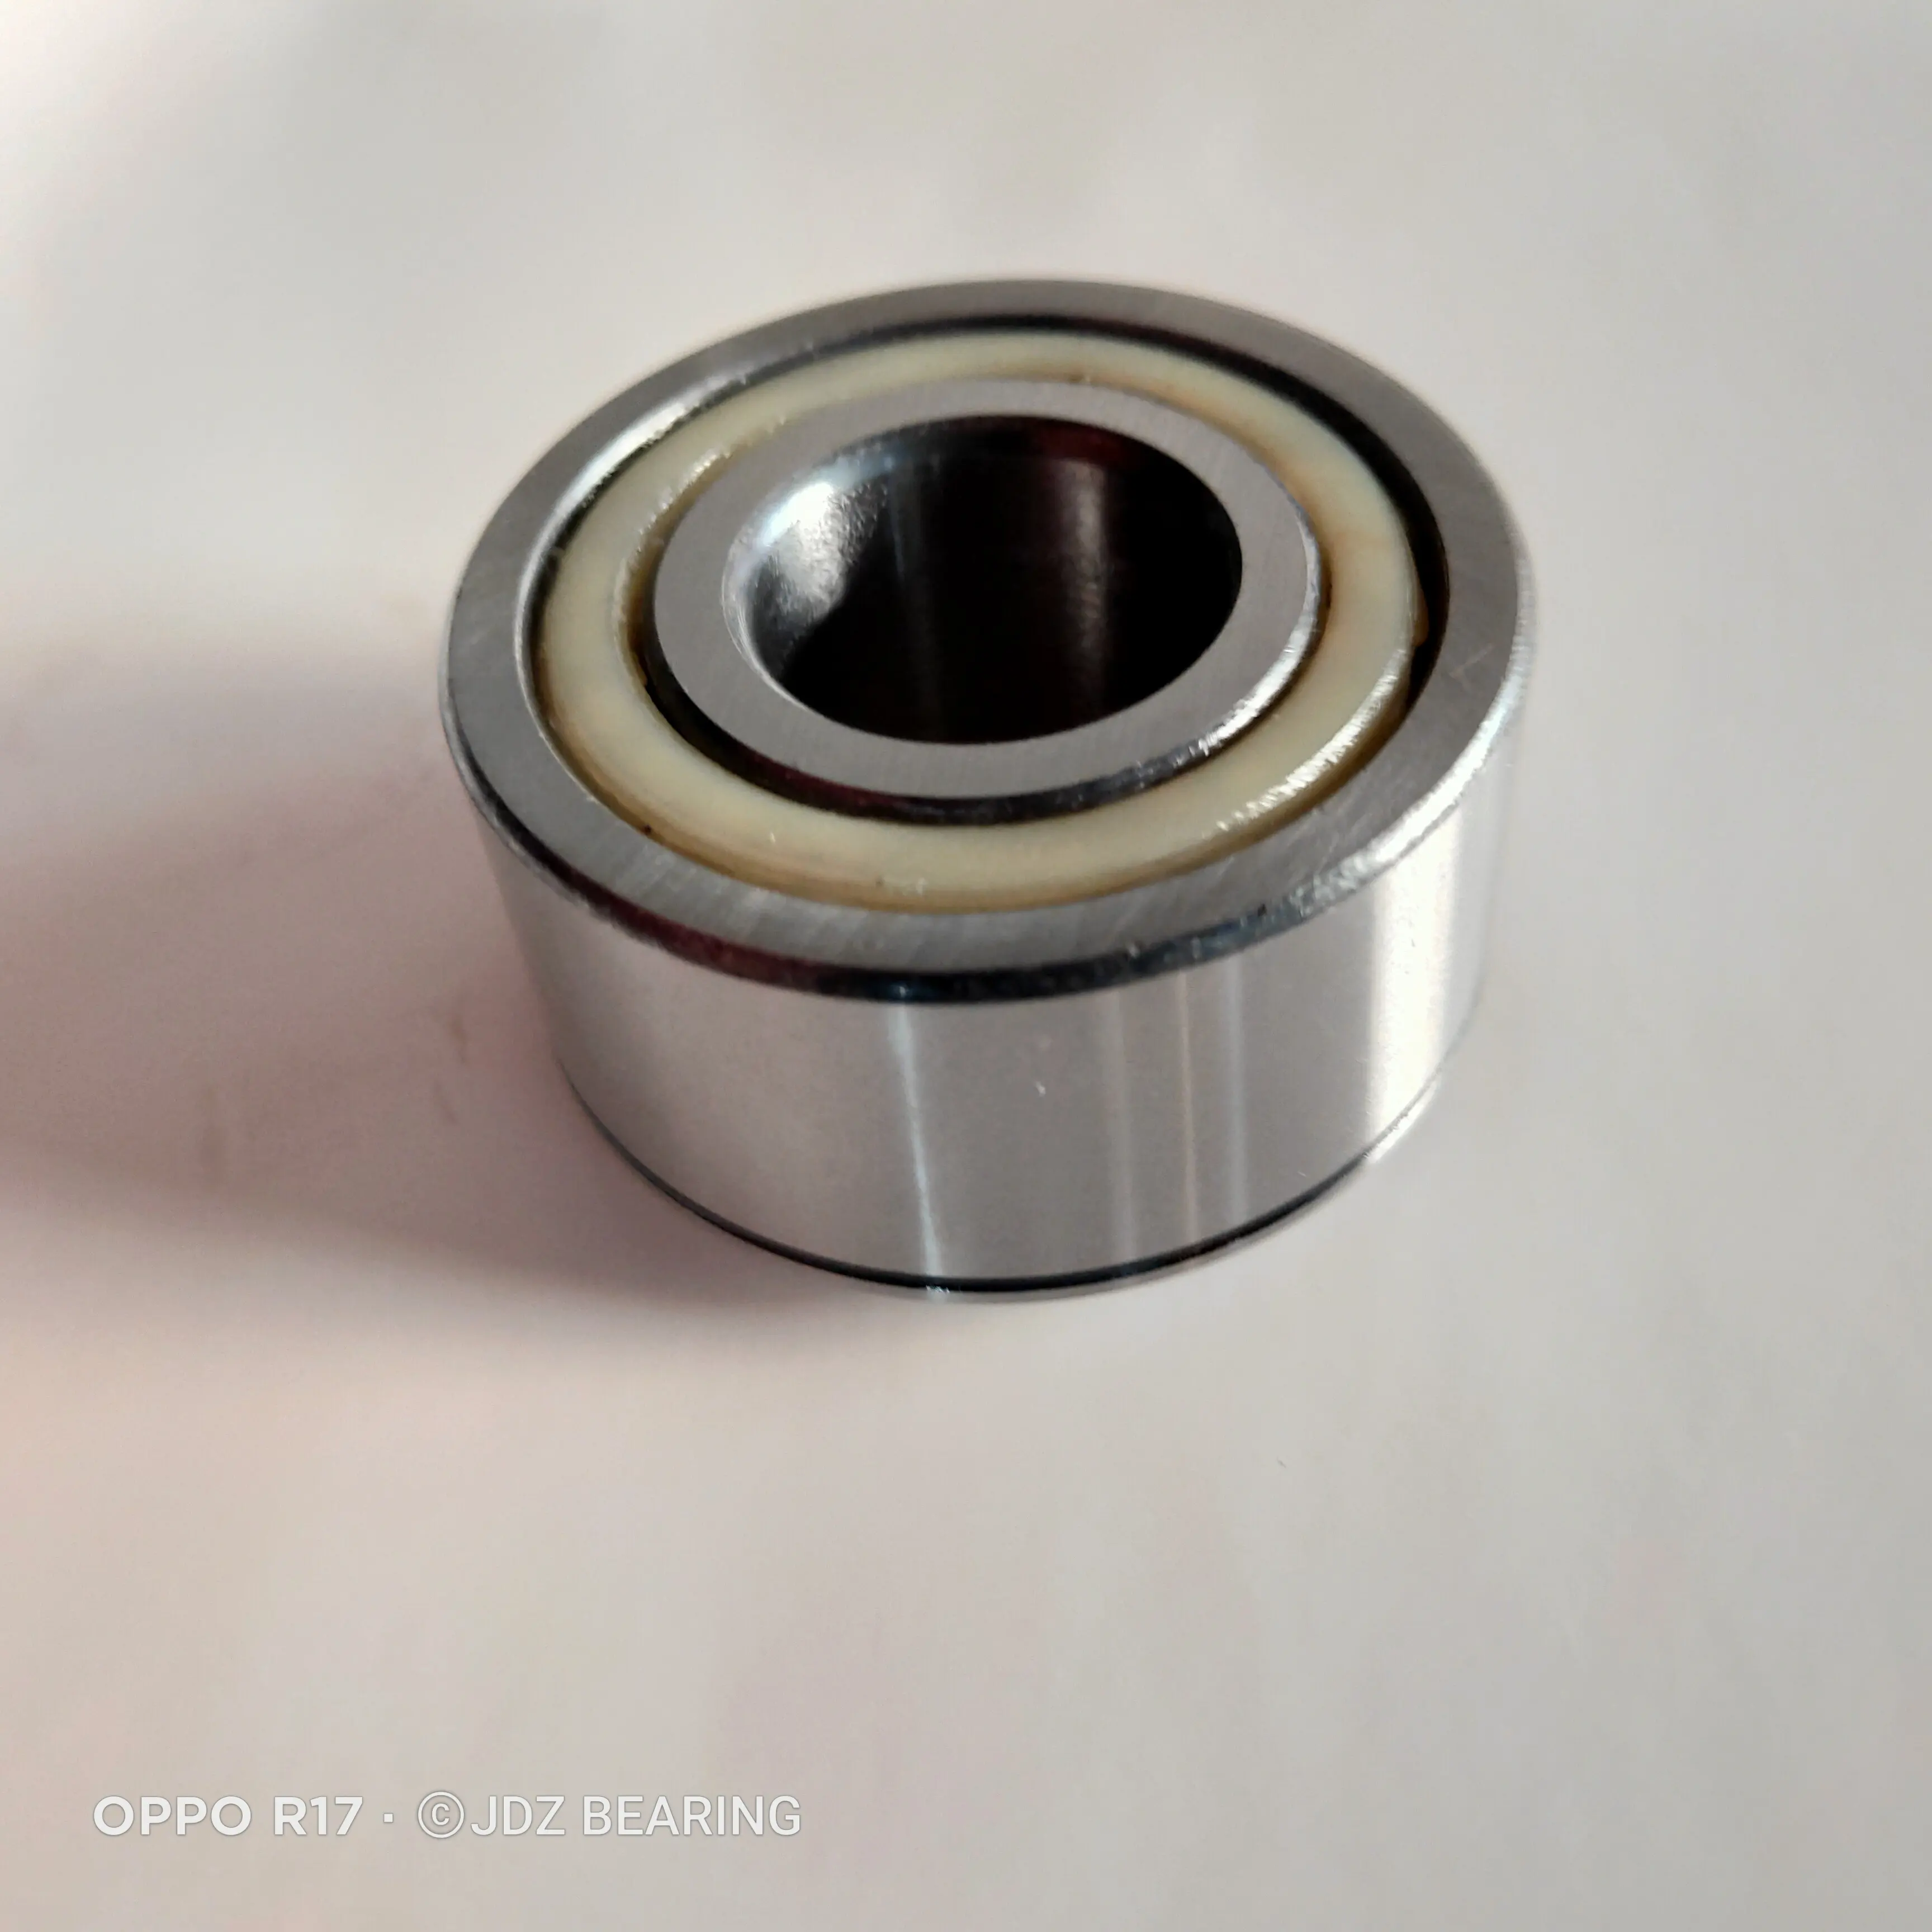 Double Row F-110390 5204KP2 203KRR2 Round Hole Deep Groove Ball Bearing Agriculture Bearing ROLAMENTO